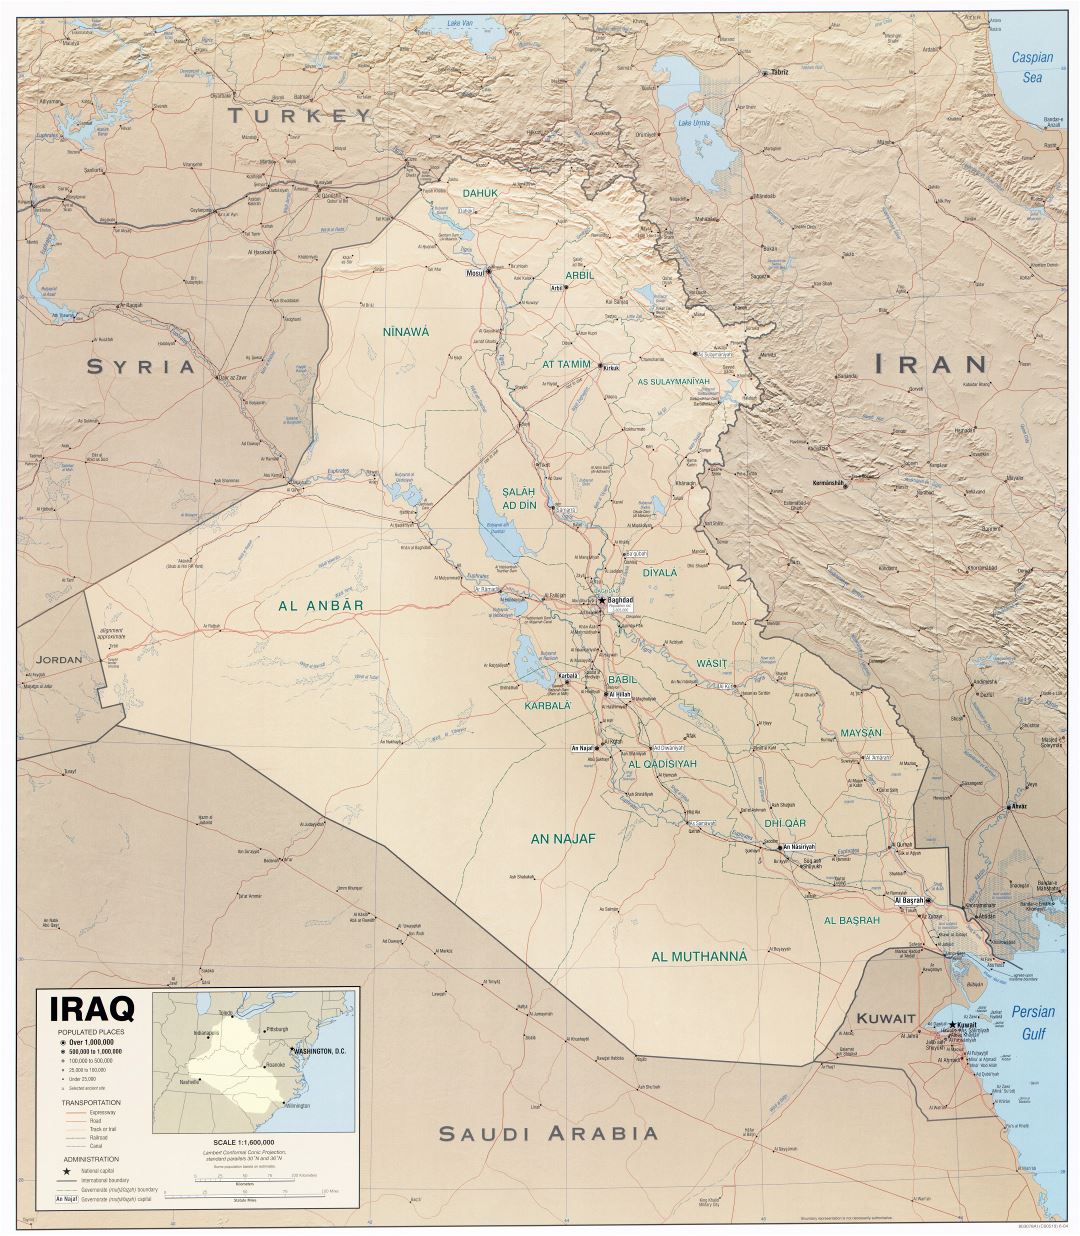 Large scale political map of Iraq with relief and other marks - 2004